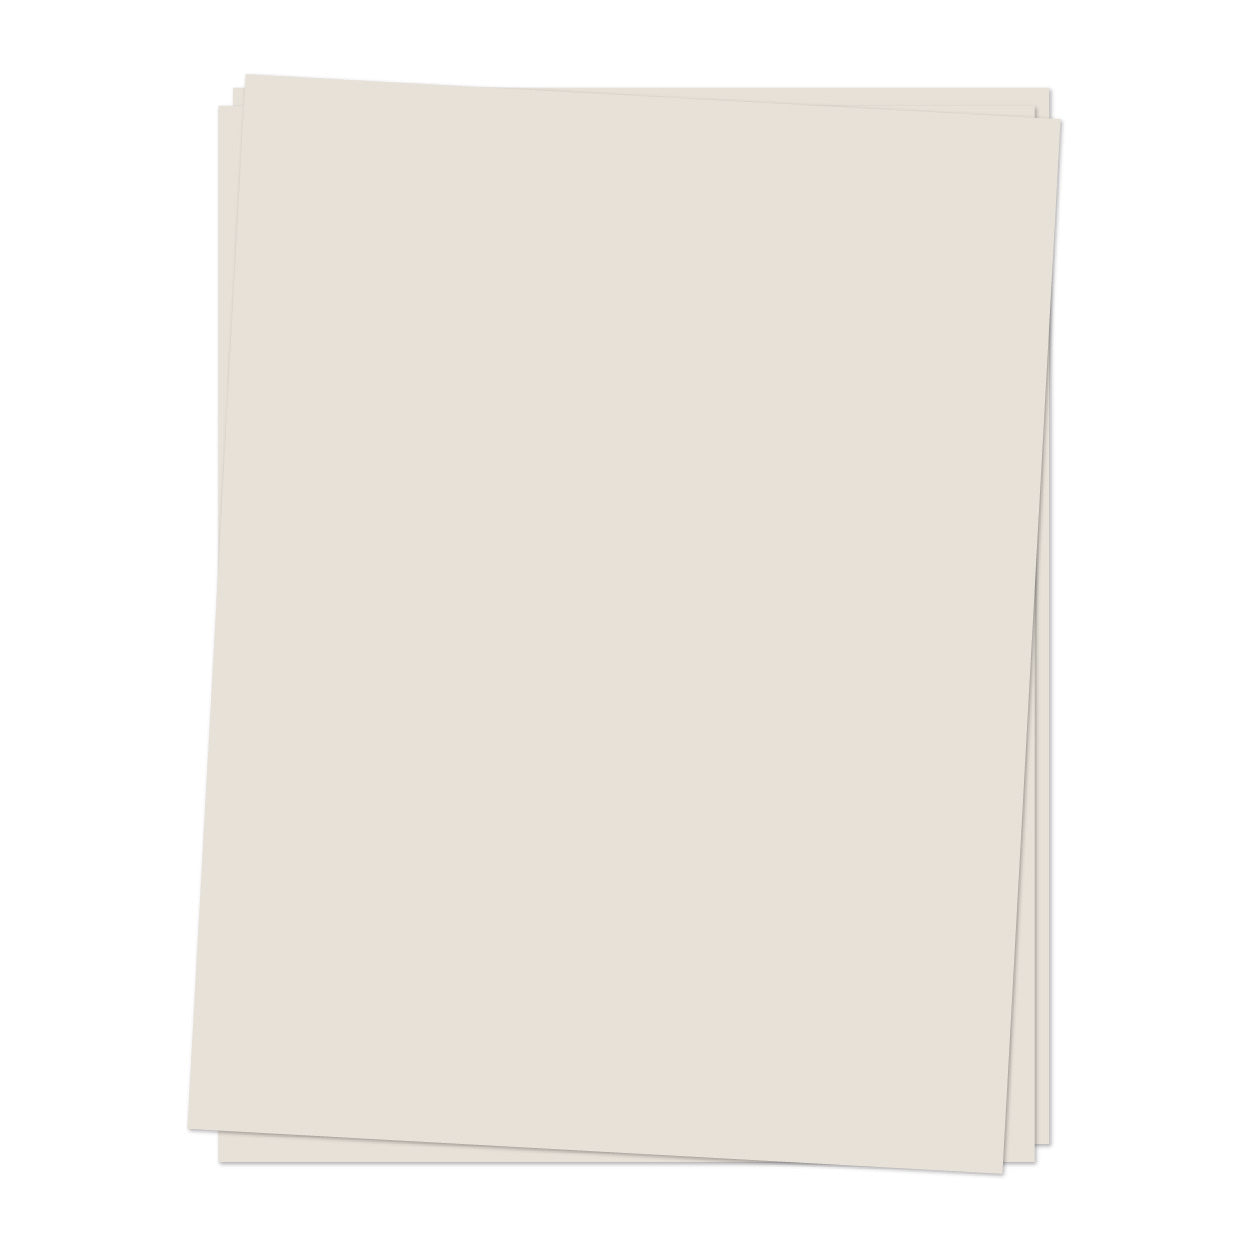 Up To 15% Off on White Cardstock Paper, 8.5 x